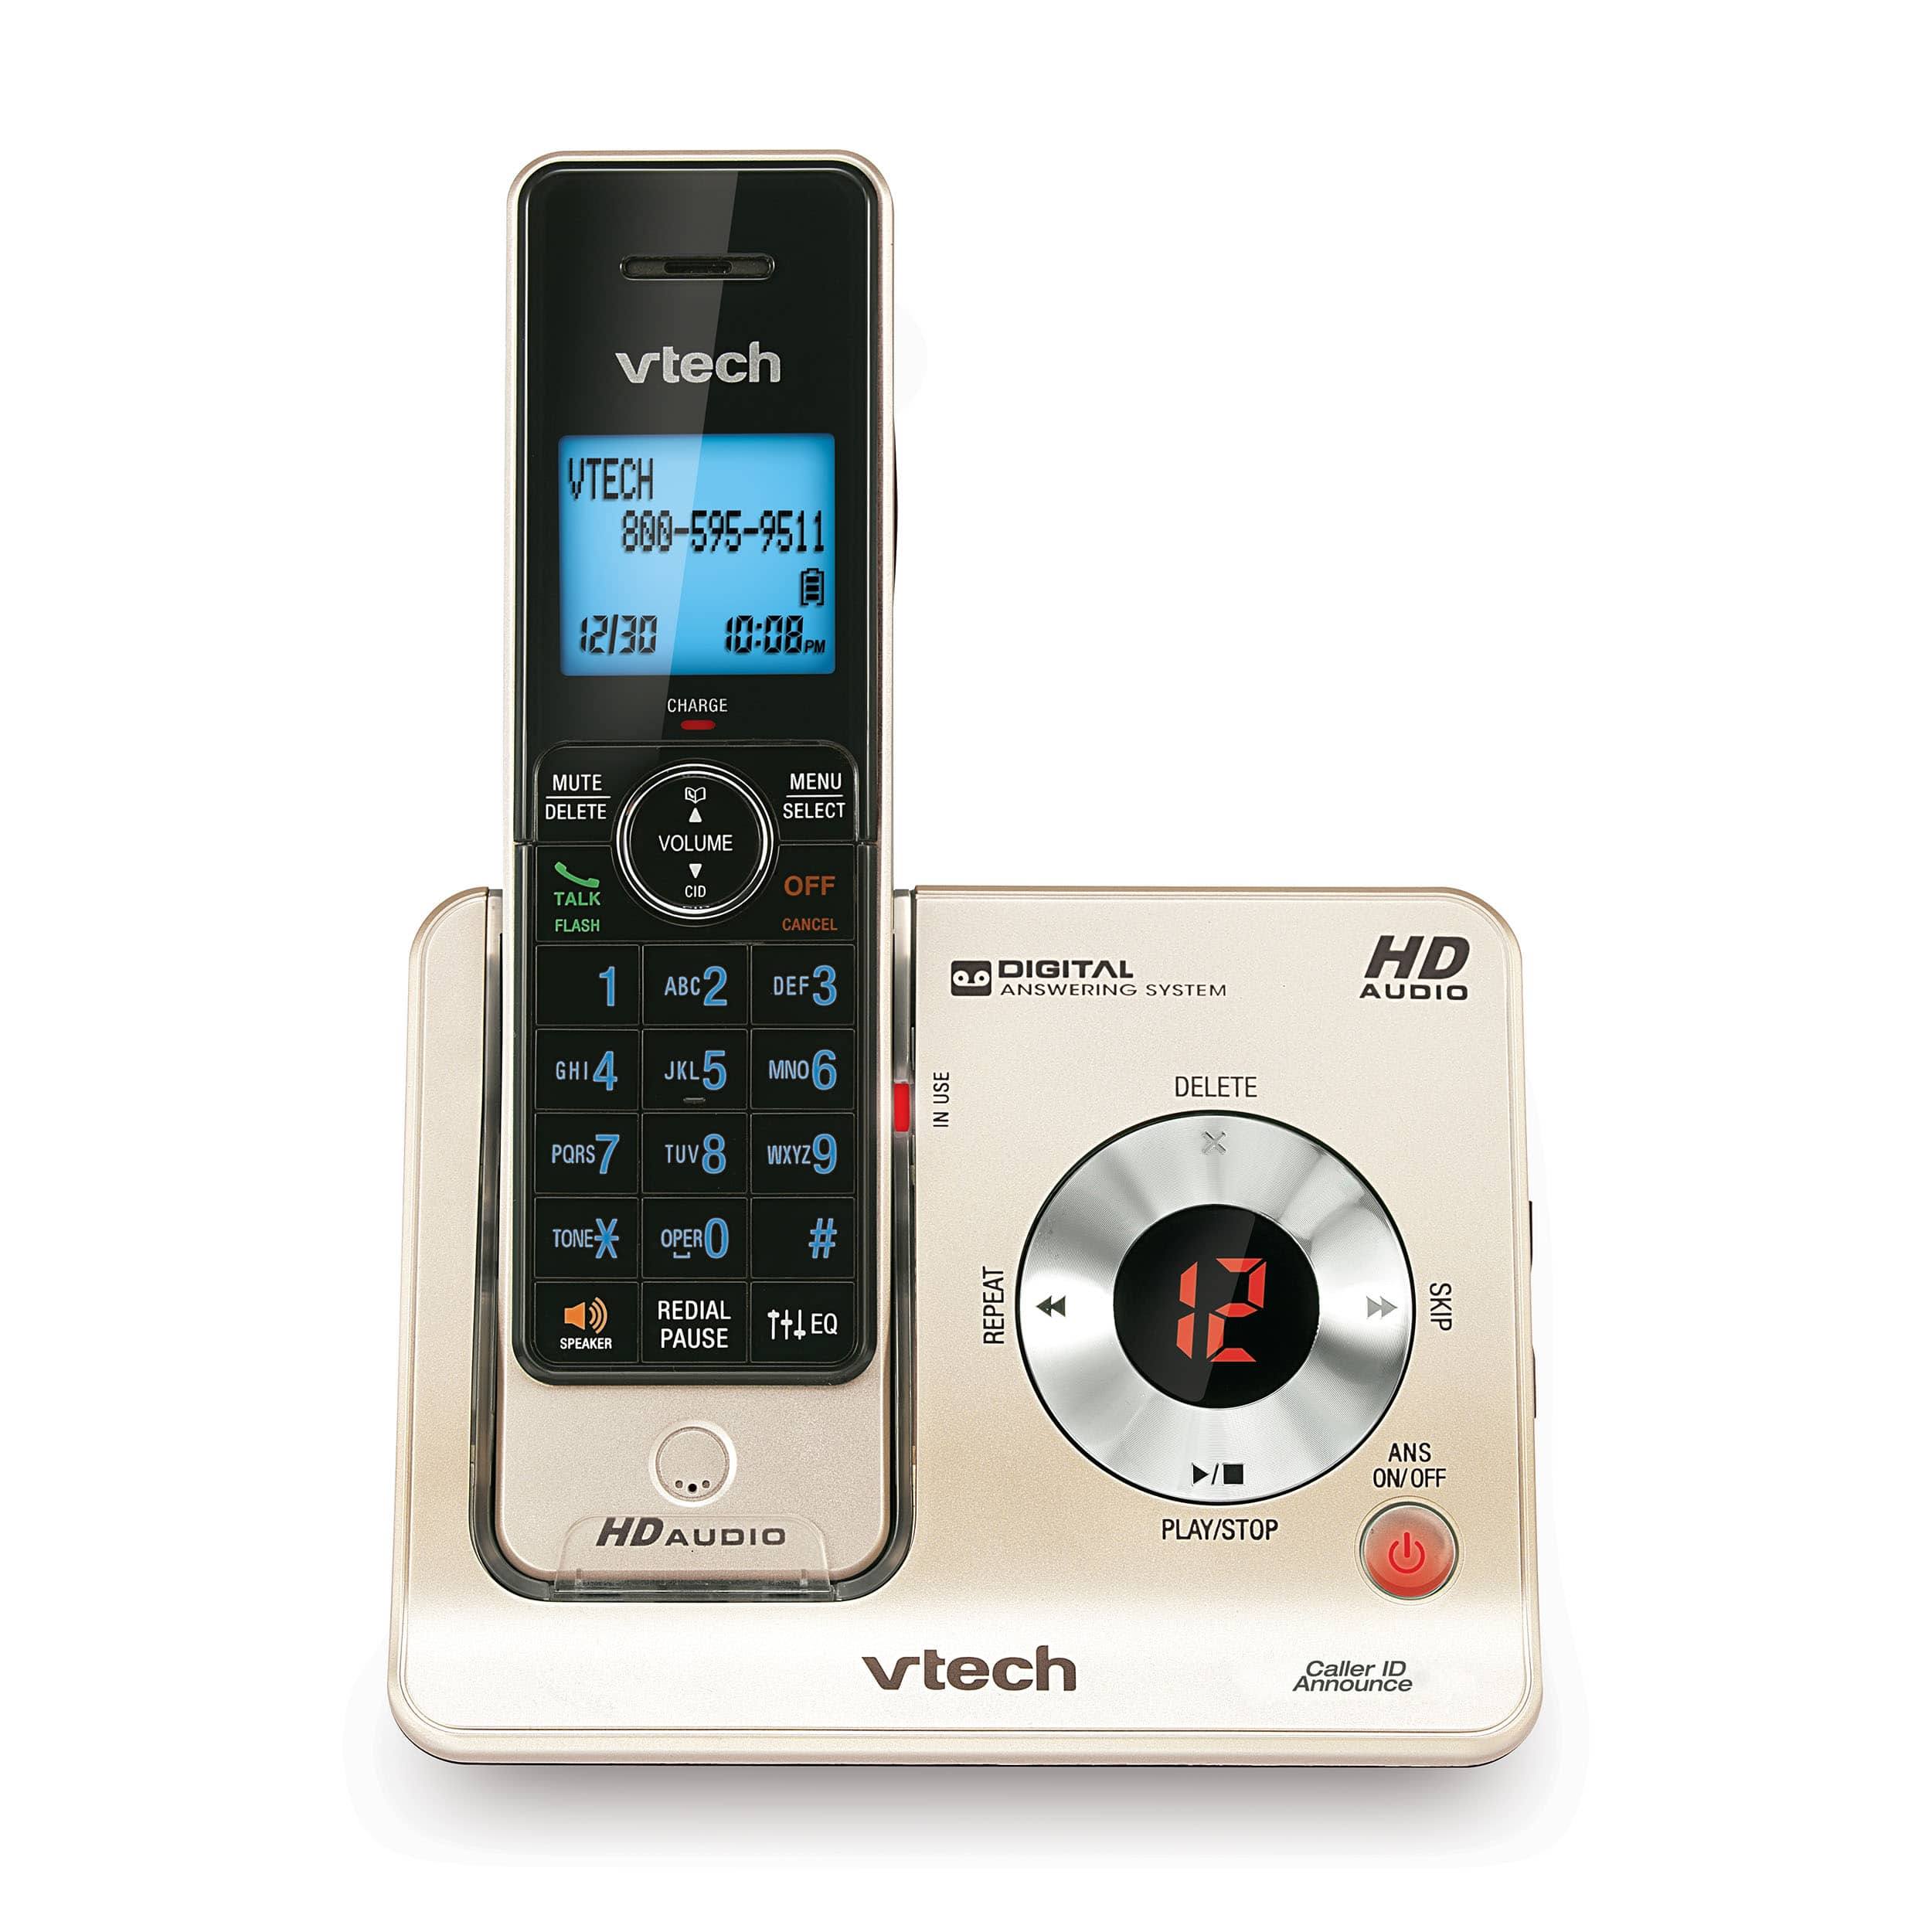 Cordless Answering System with Caller ID/Call Waiting